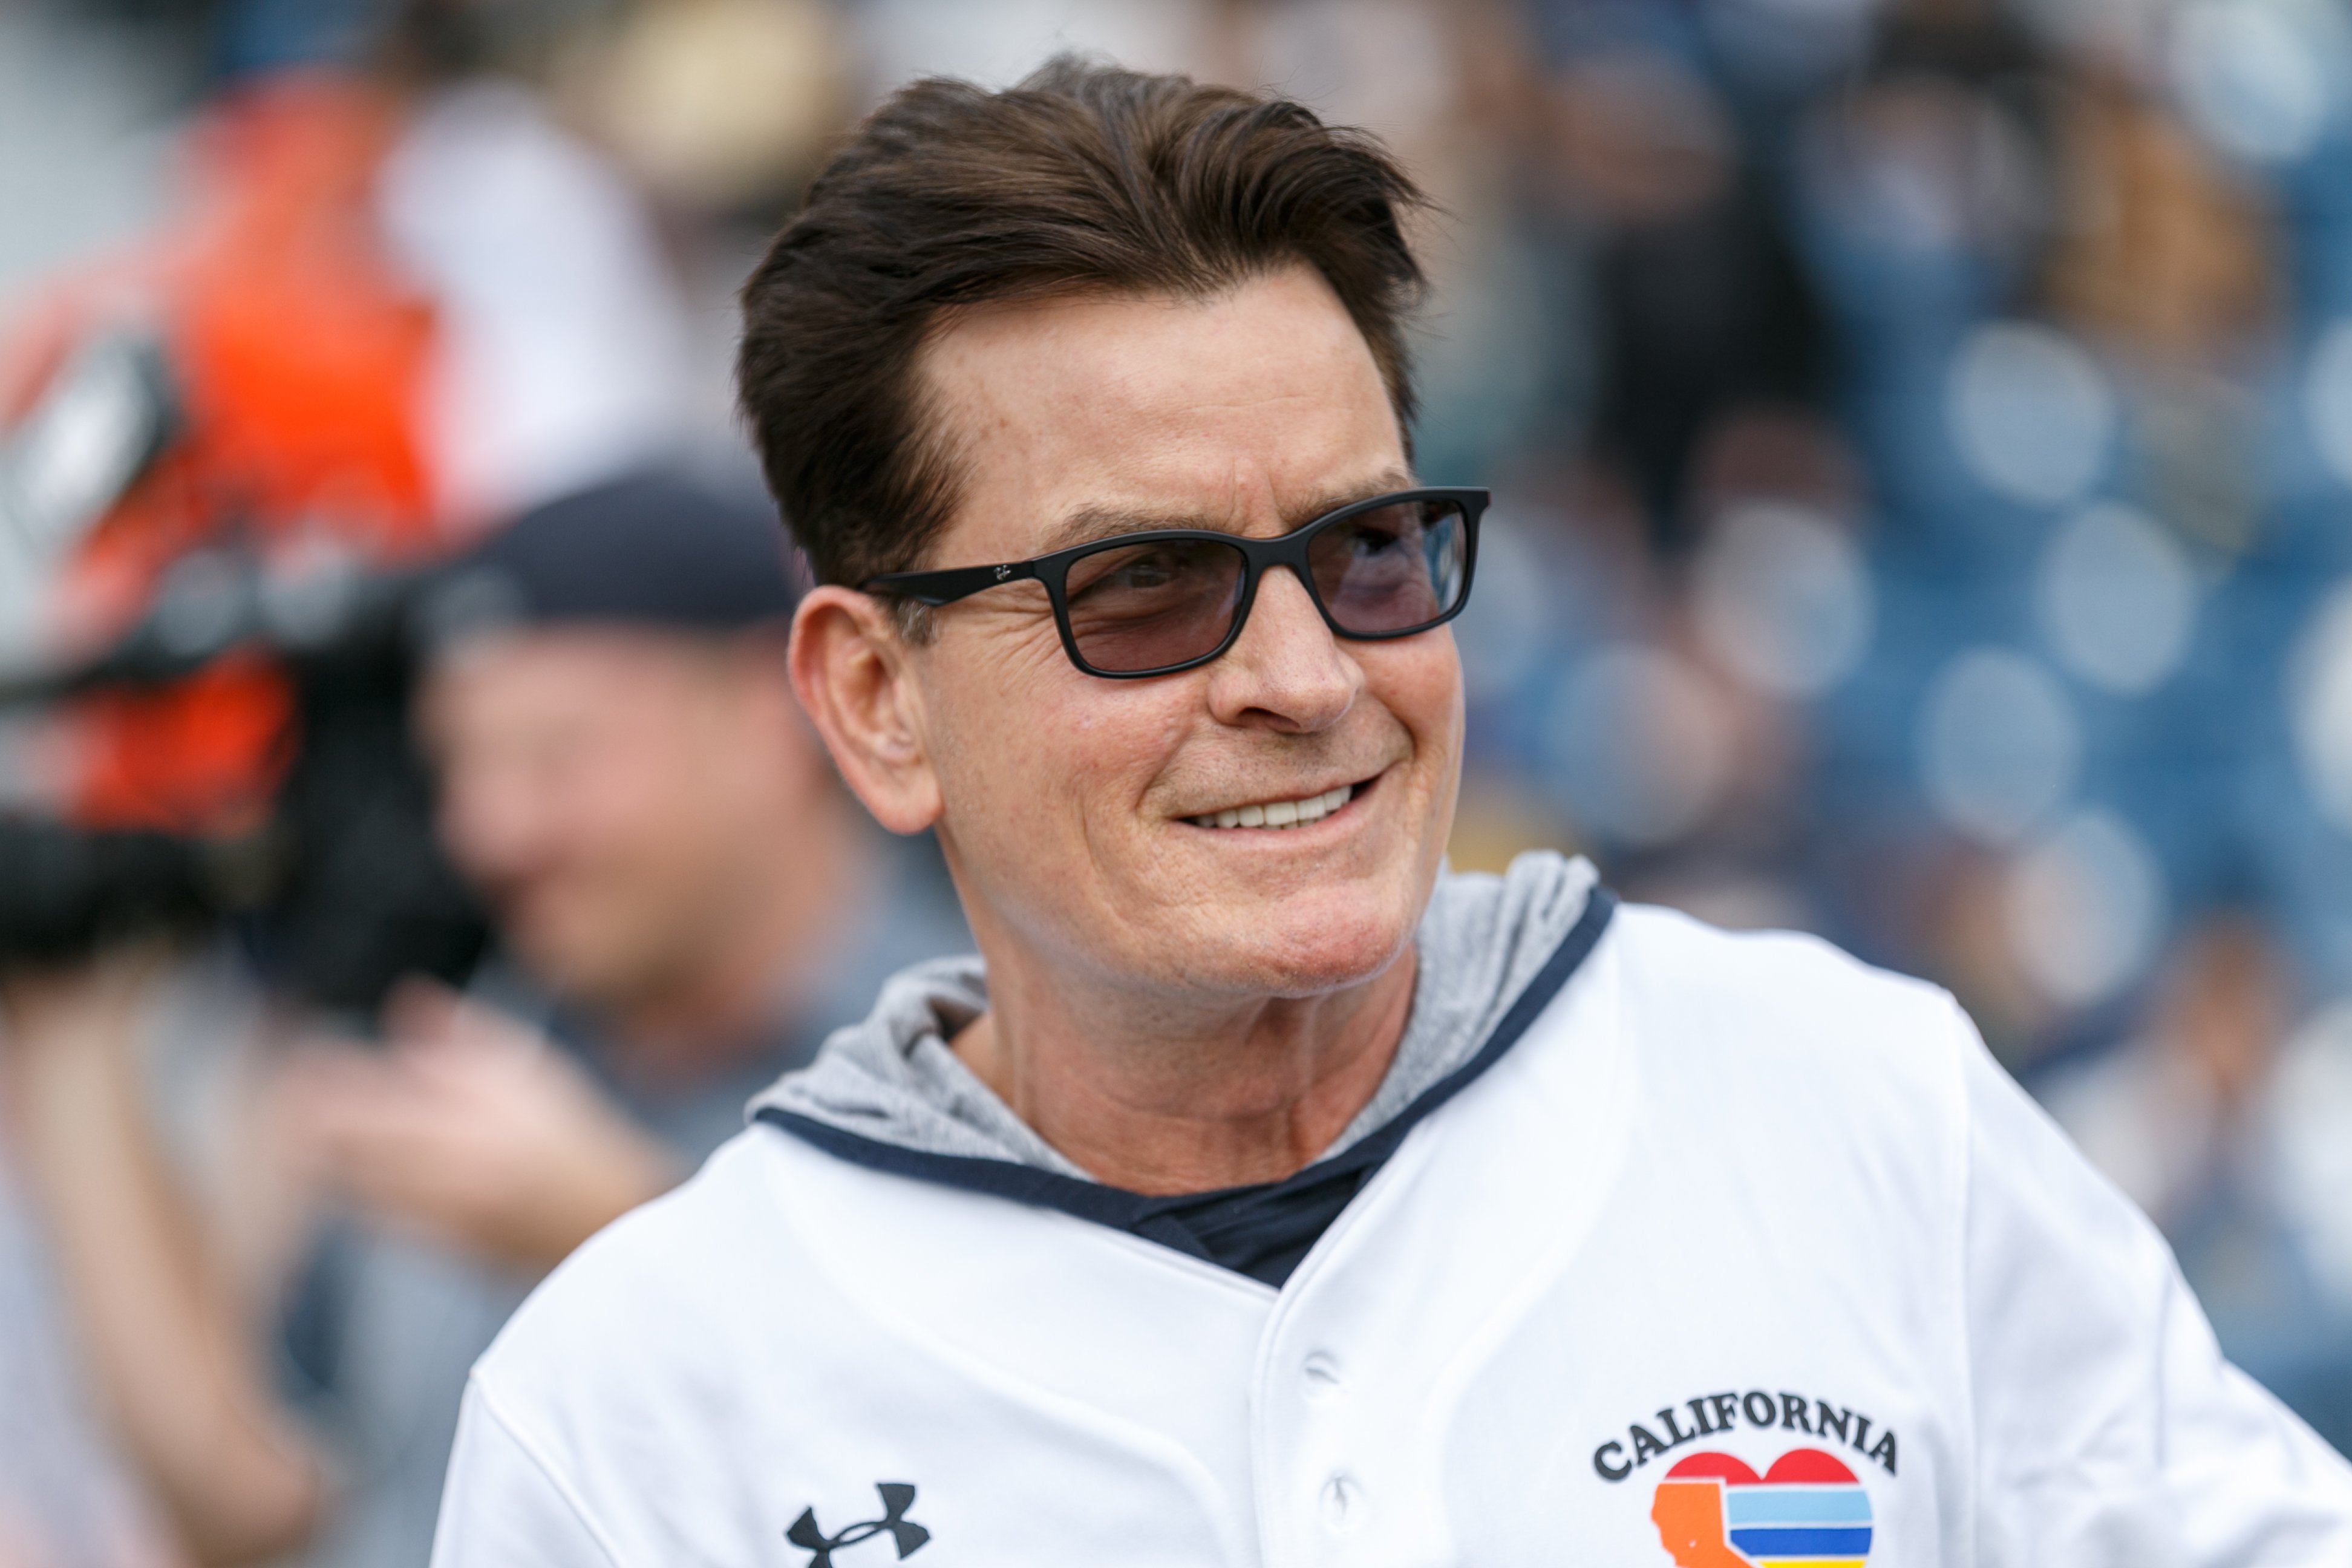 Charlie Sheen at a charity softball game for "California Strong" on January 13, 2019, in Malibu | Source: Getty Images